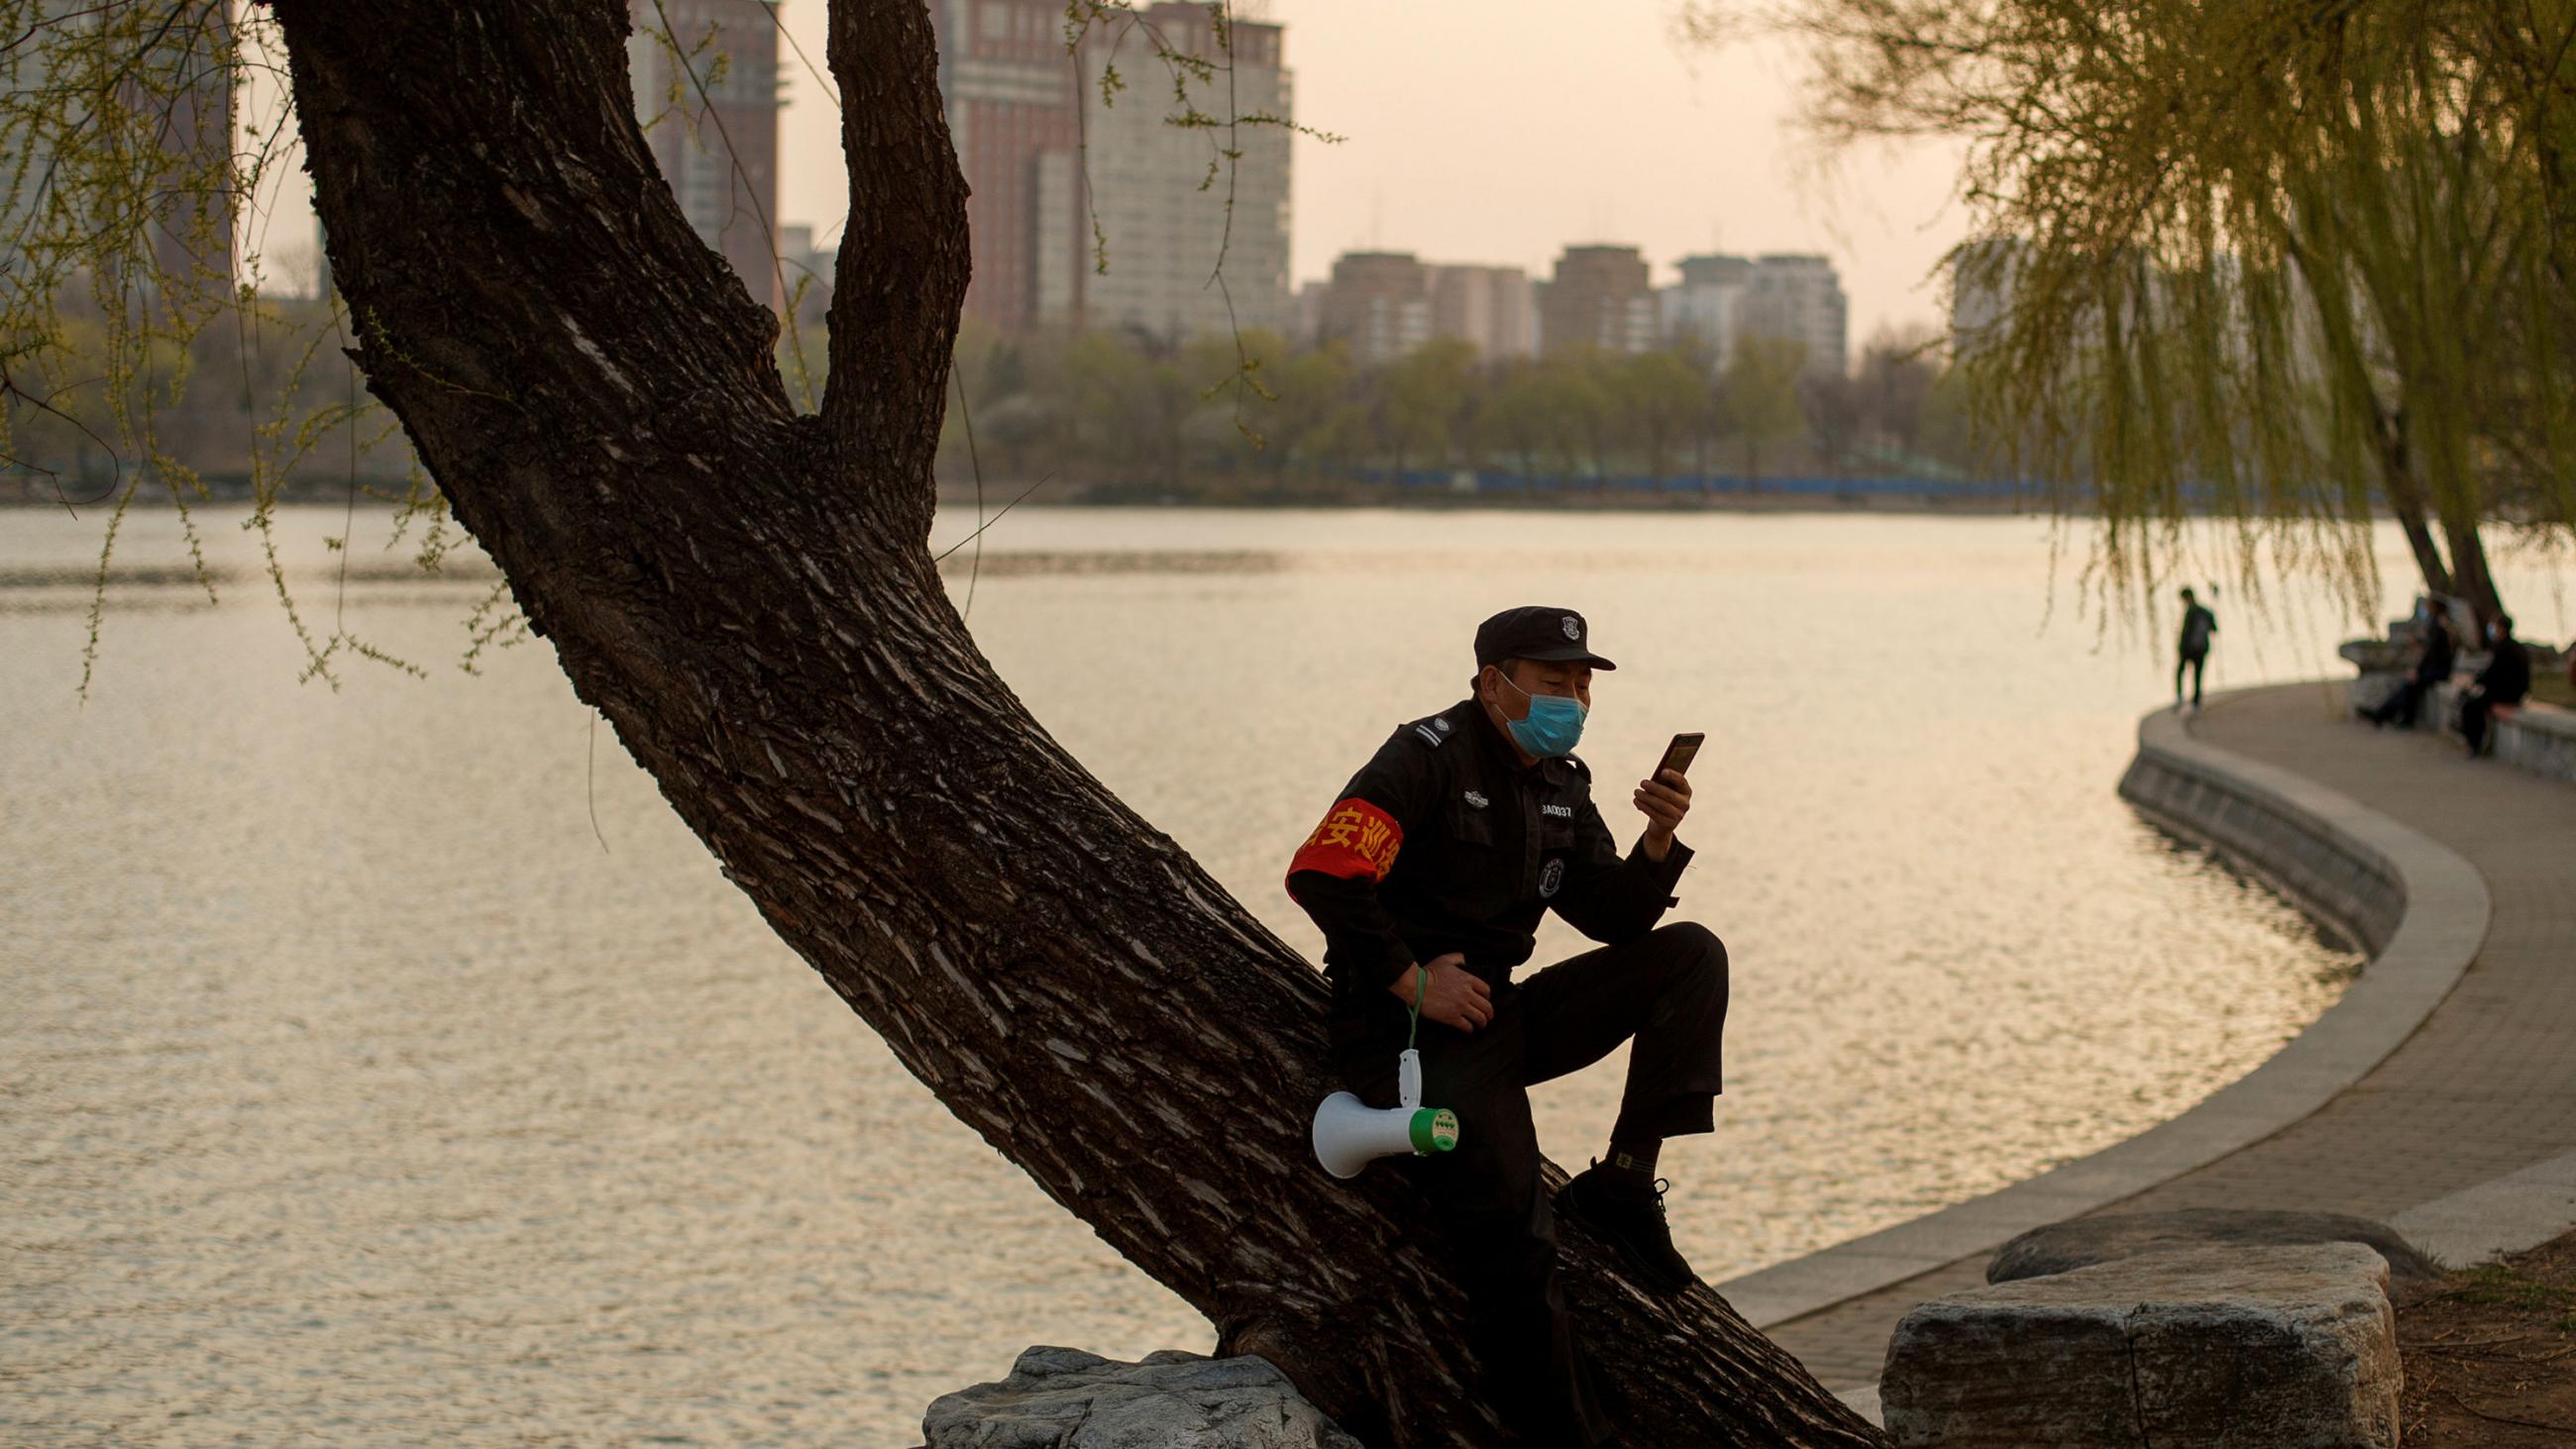 The photo shows a man sitting in a tree by a lake with a meandering walk. He is looking at his phone. 